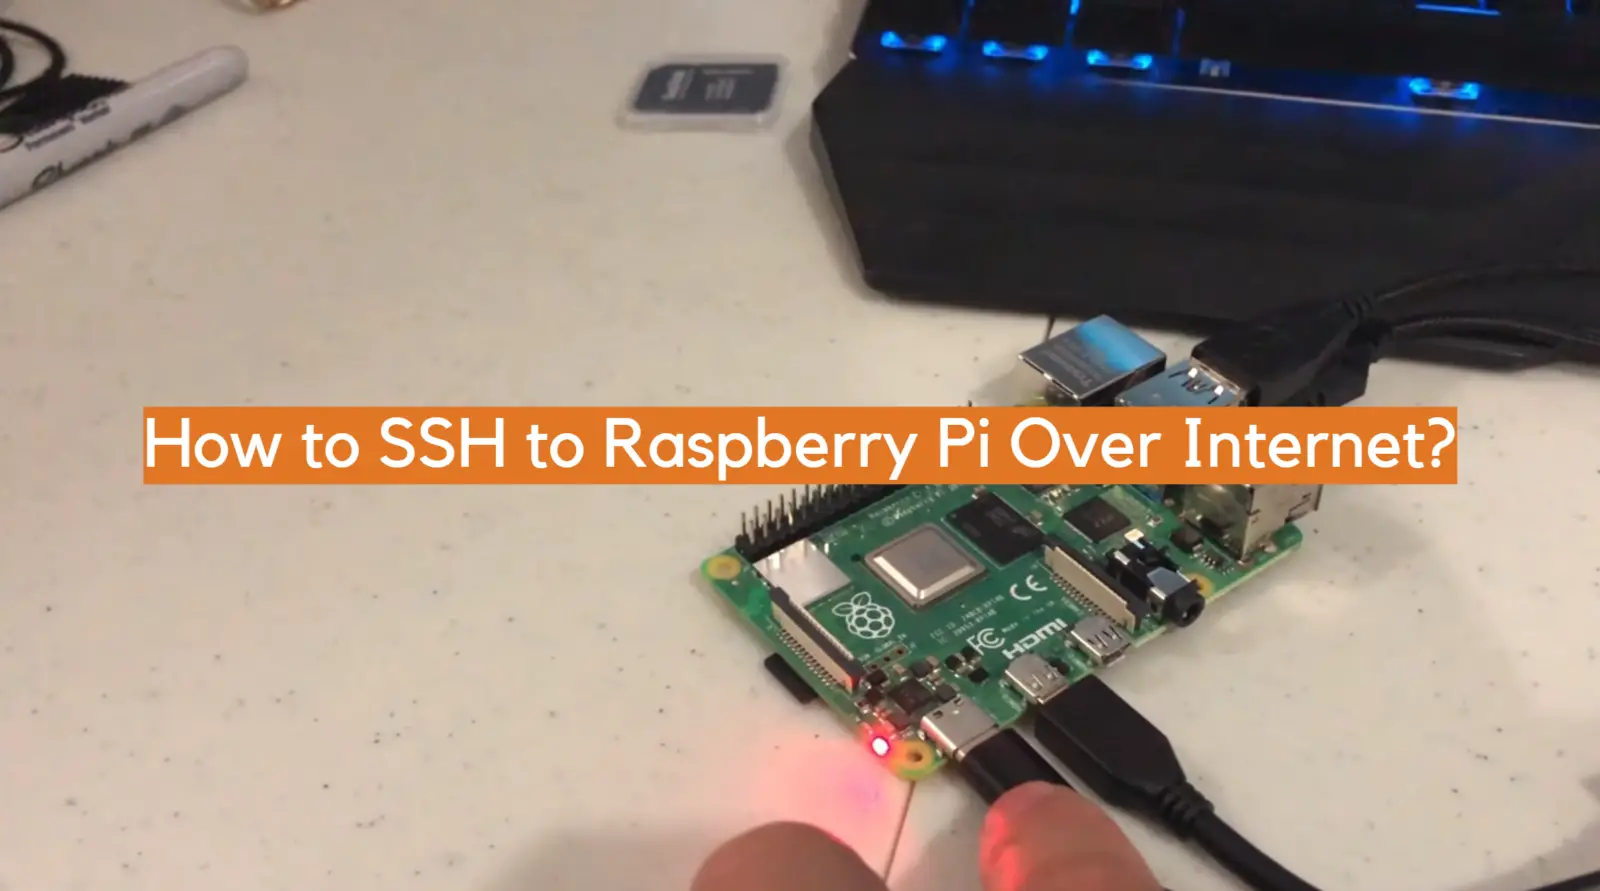 How to SSH to Raspberry Pi Over Internet?